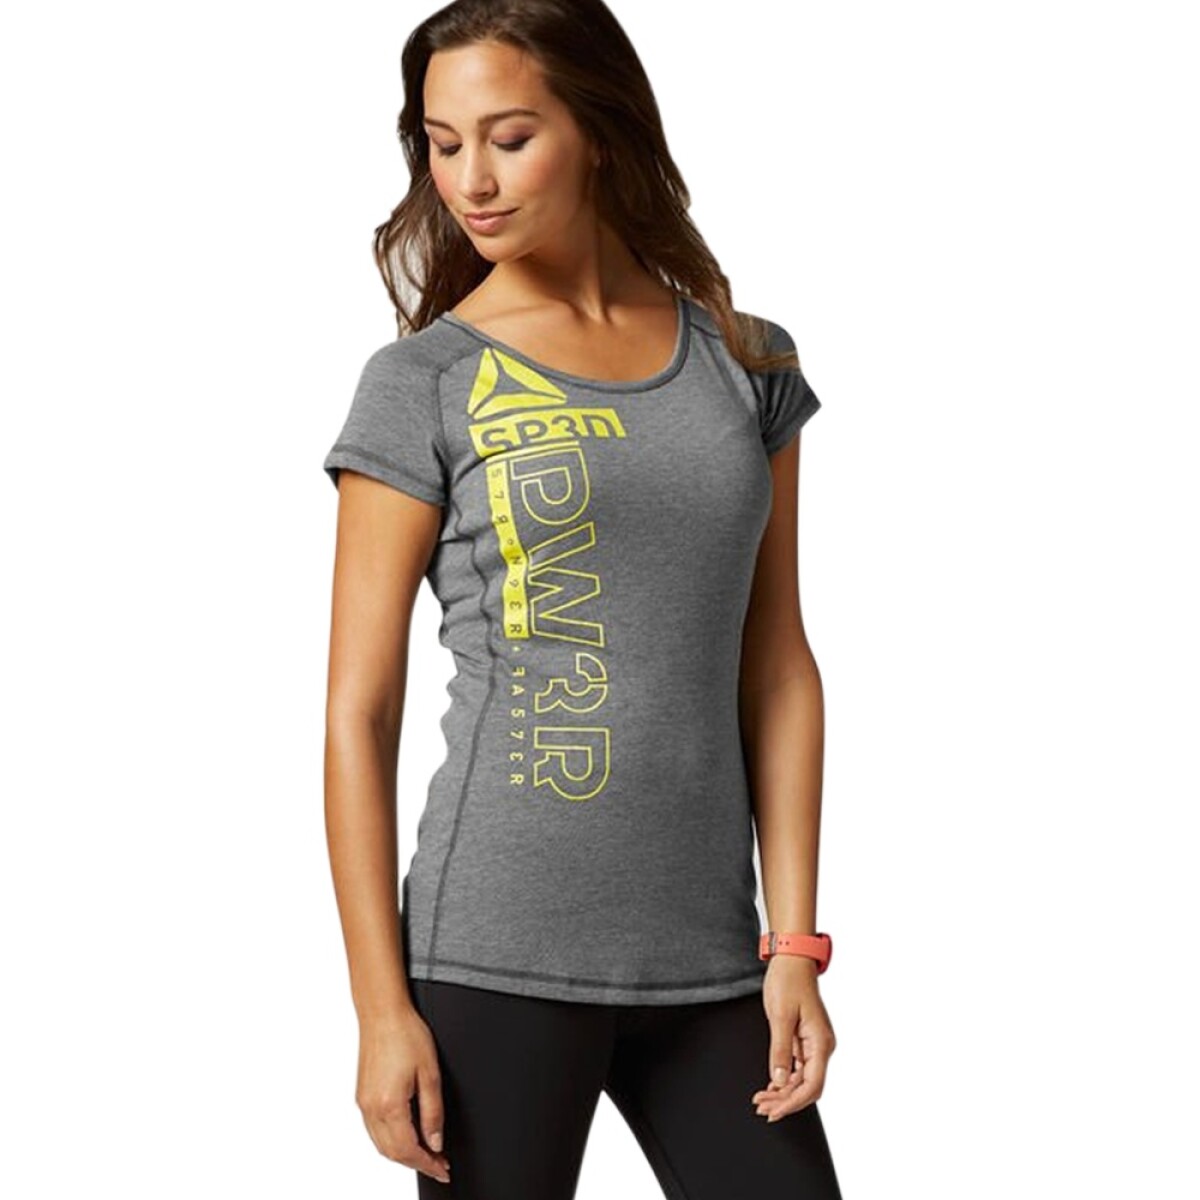 Remera Reebok Mujer Os Triblend Crw Deporte Crossfit Fitness - Gris Oscuro 